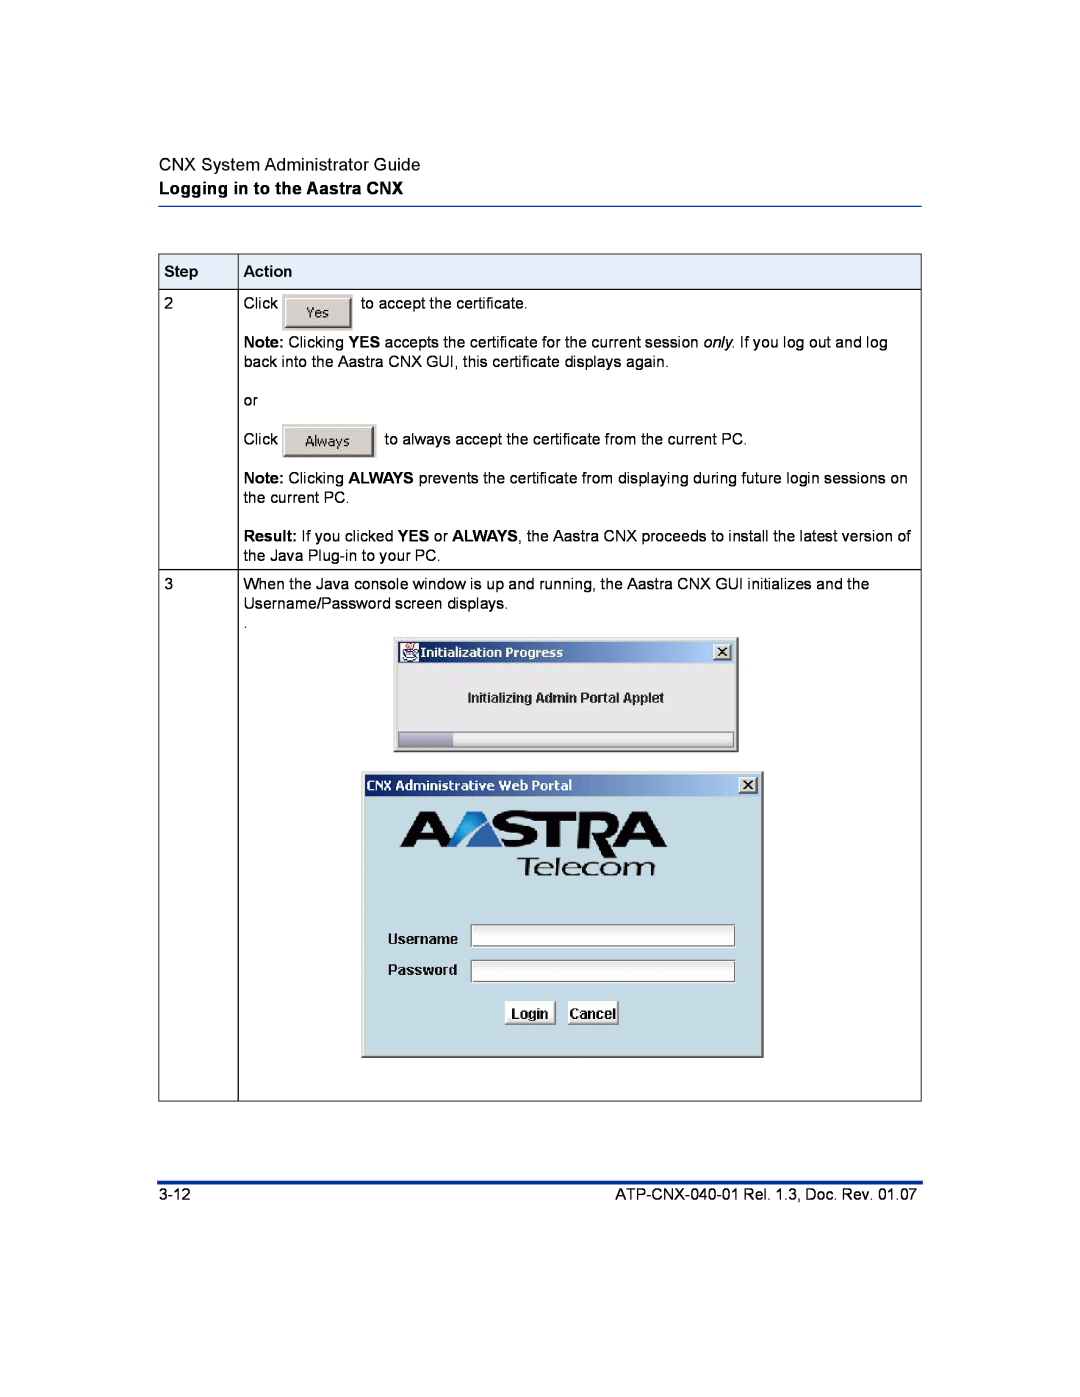 Aastra Telecom ATP-CNX-040-01 manual CNX System Administrator Guide, Logging in to the Aastra CNX, Step, Action 